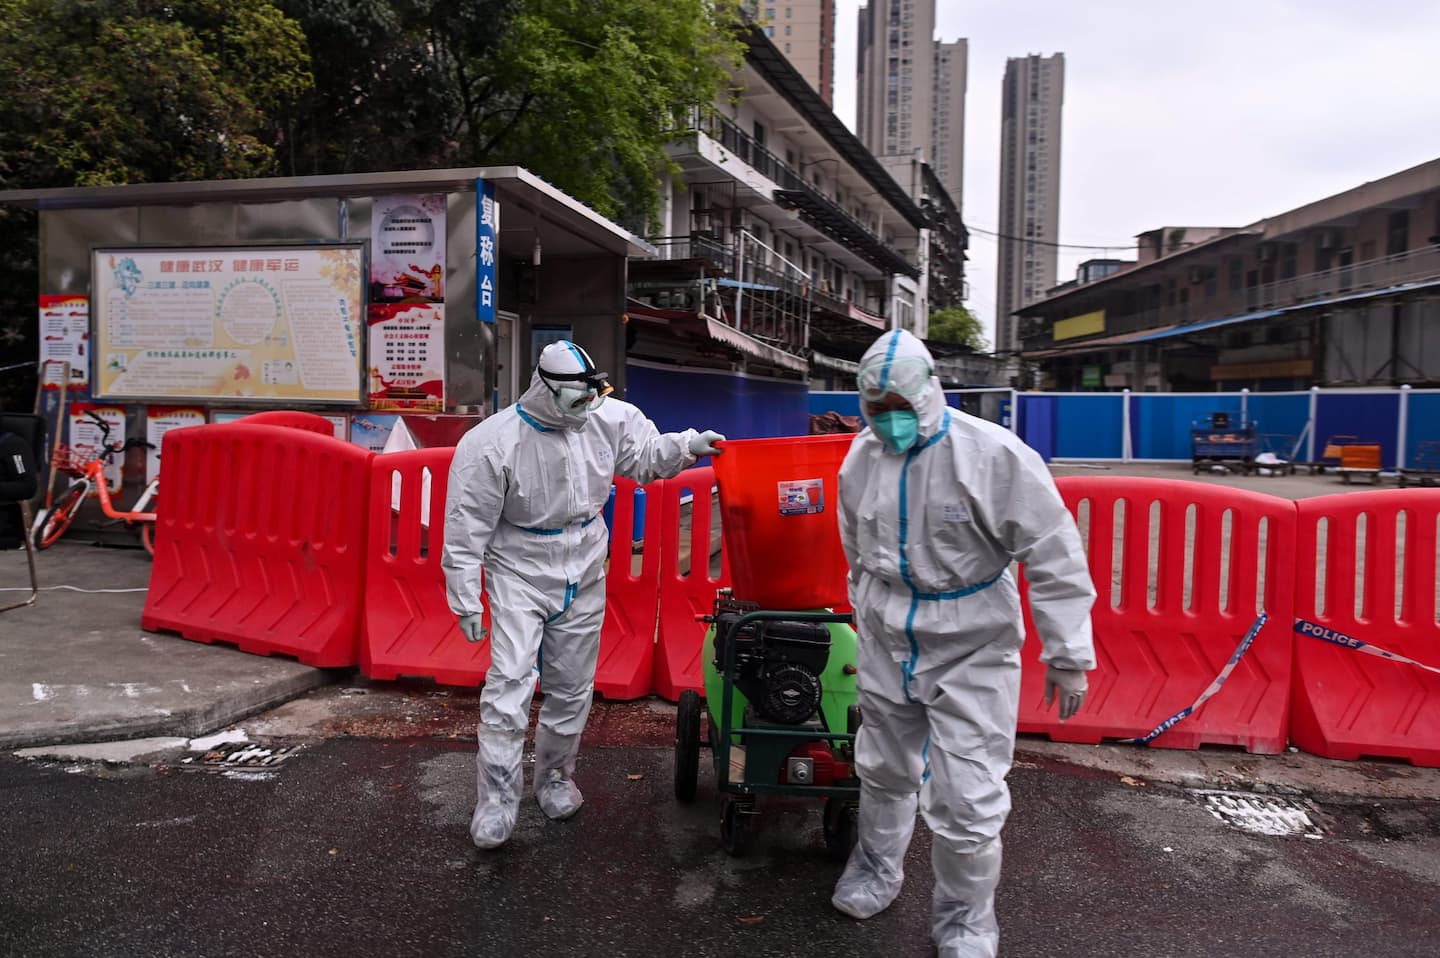 The pandemic did indeed begin in the Wuhan market, conclude two studies